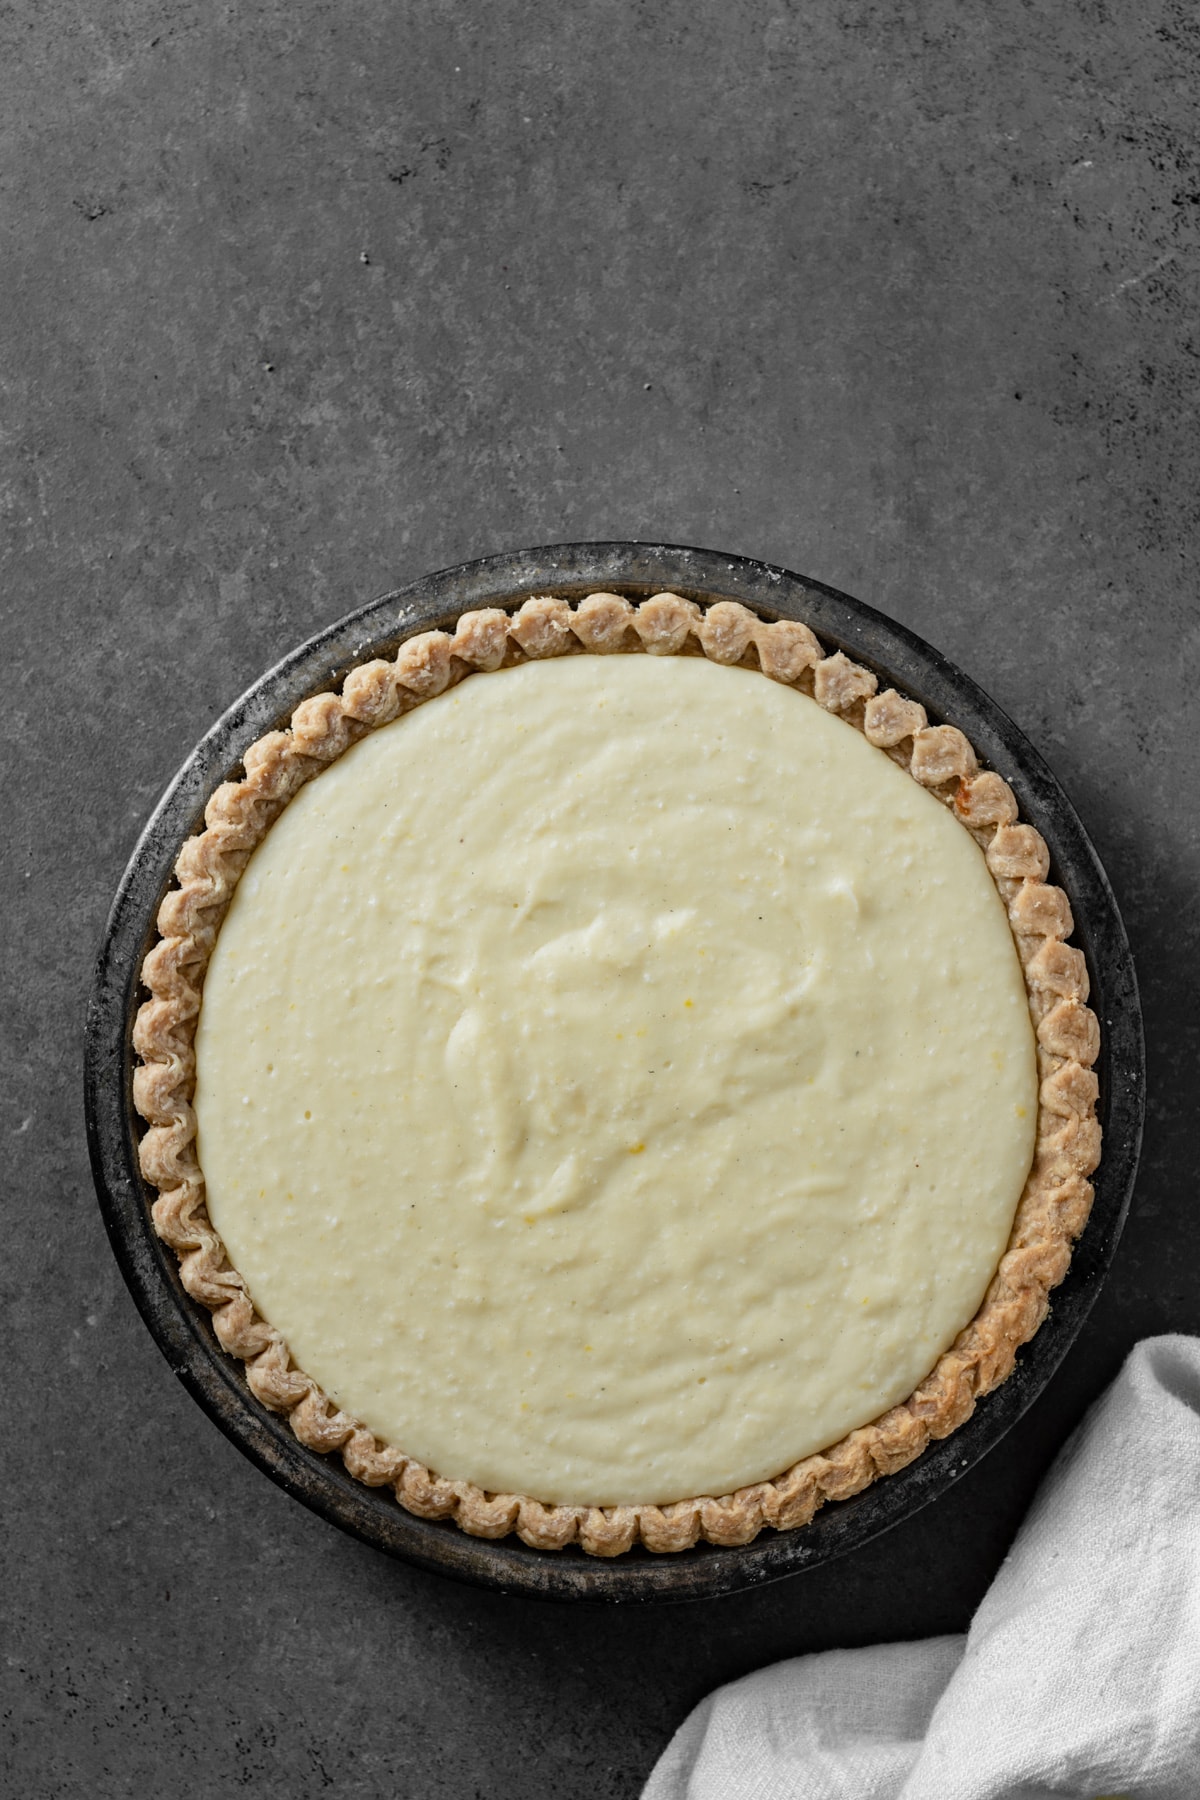 Showing coconut cream pie filling in a baked pie crust.